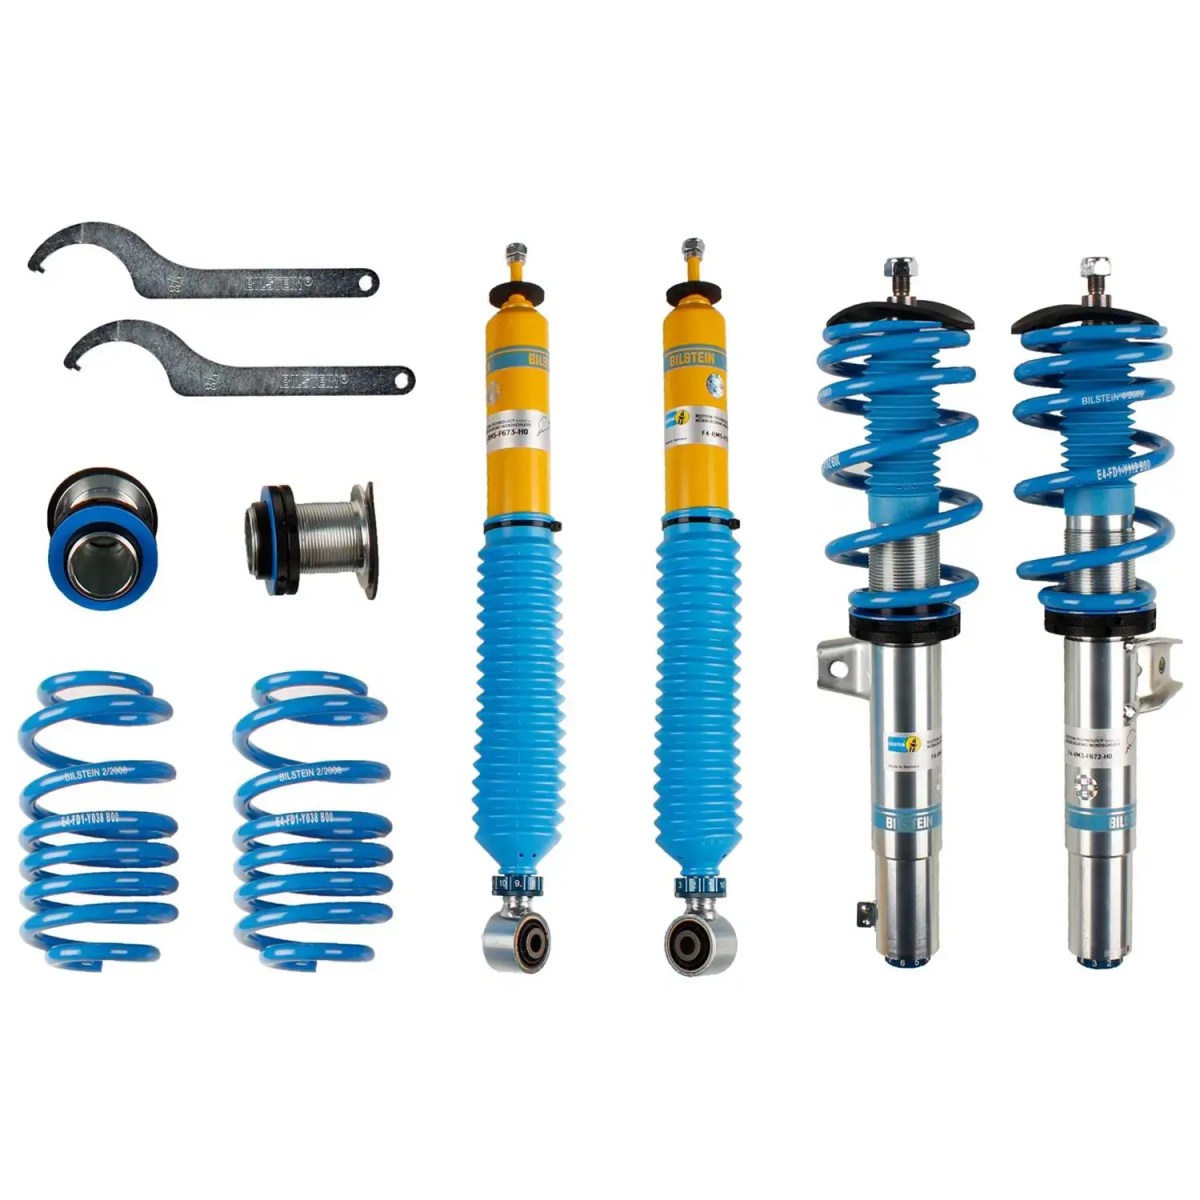 Coilovers like this blue and yellow set from Bilstein, will help improve your autocross times.